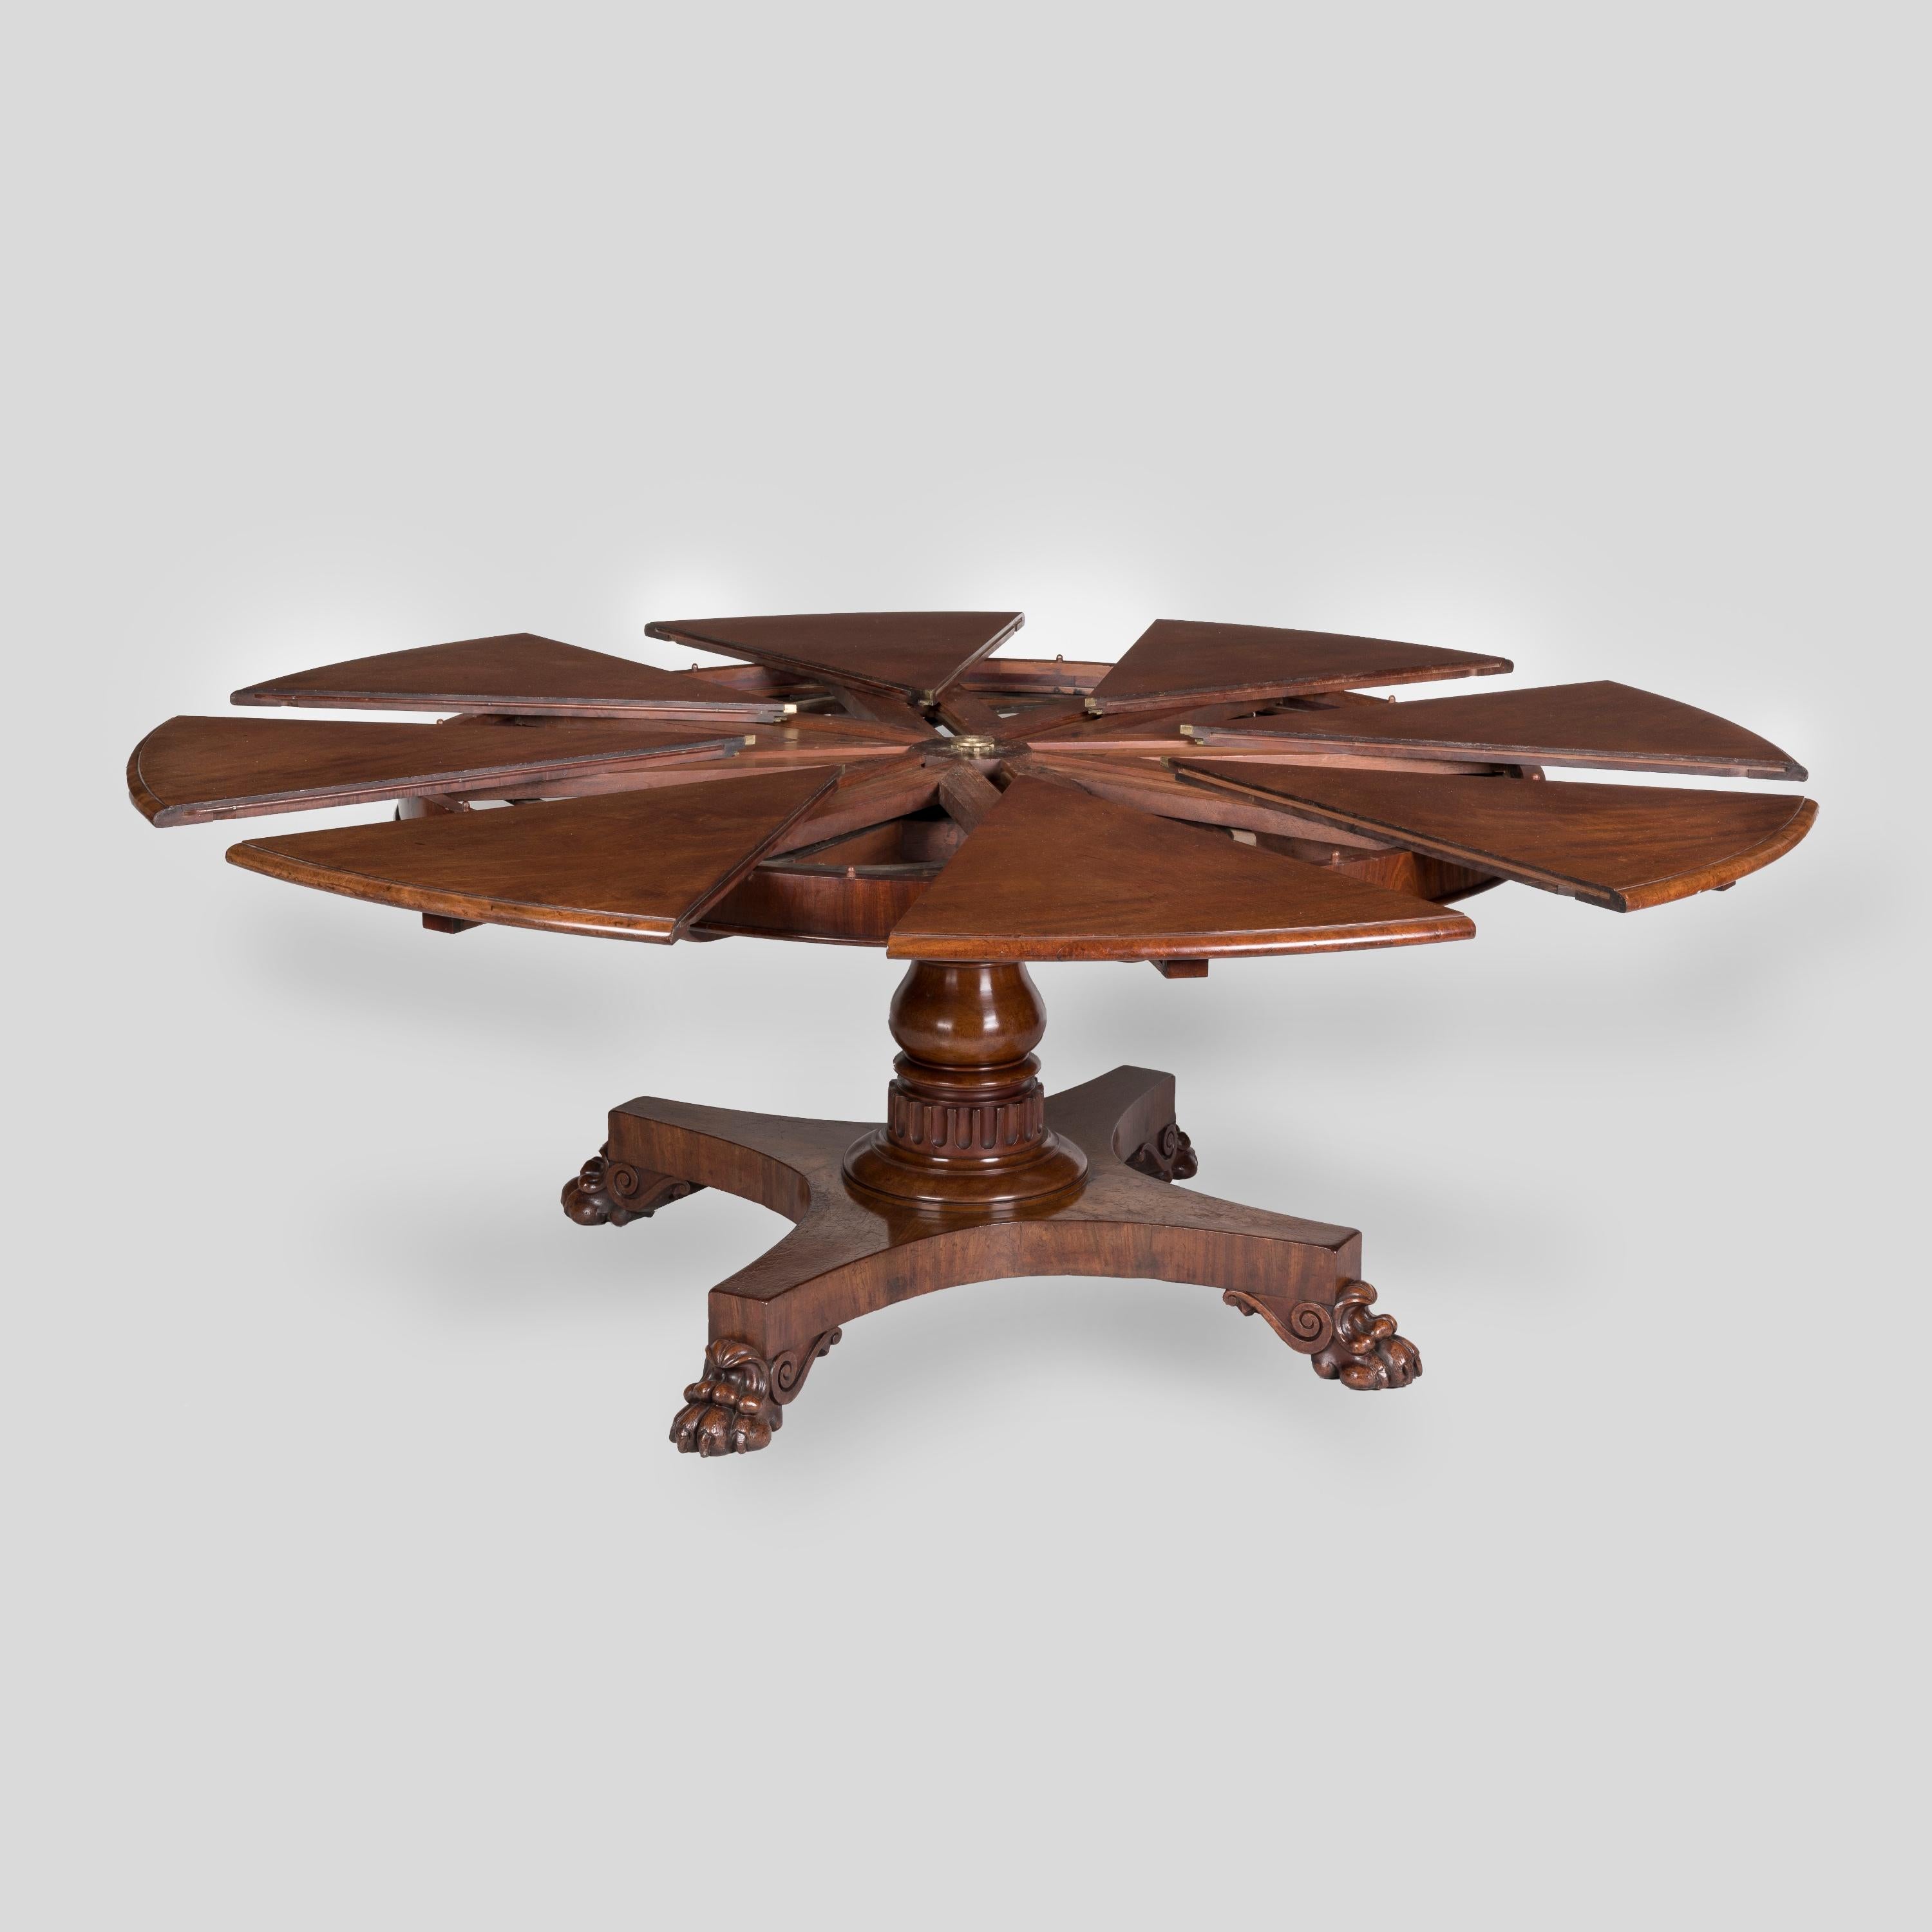 A Rare 'Jupe's' Extensible Mechanical Action Circular Dining Table
By Johnstone & Jeanes of New Bond Street

Together with its original Leaf Cabinet
By Johnstone & Jeanes

Constructed in mahogany, rising from four 'lions paw' feet joined by an